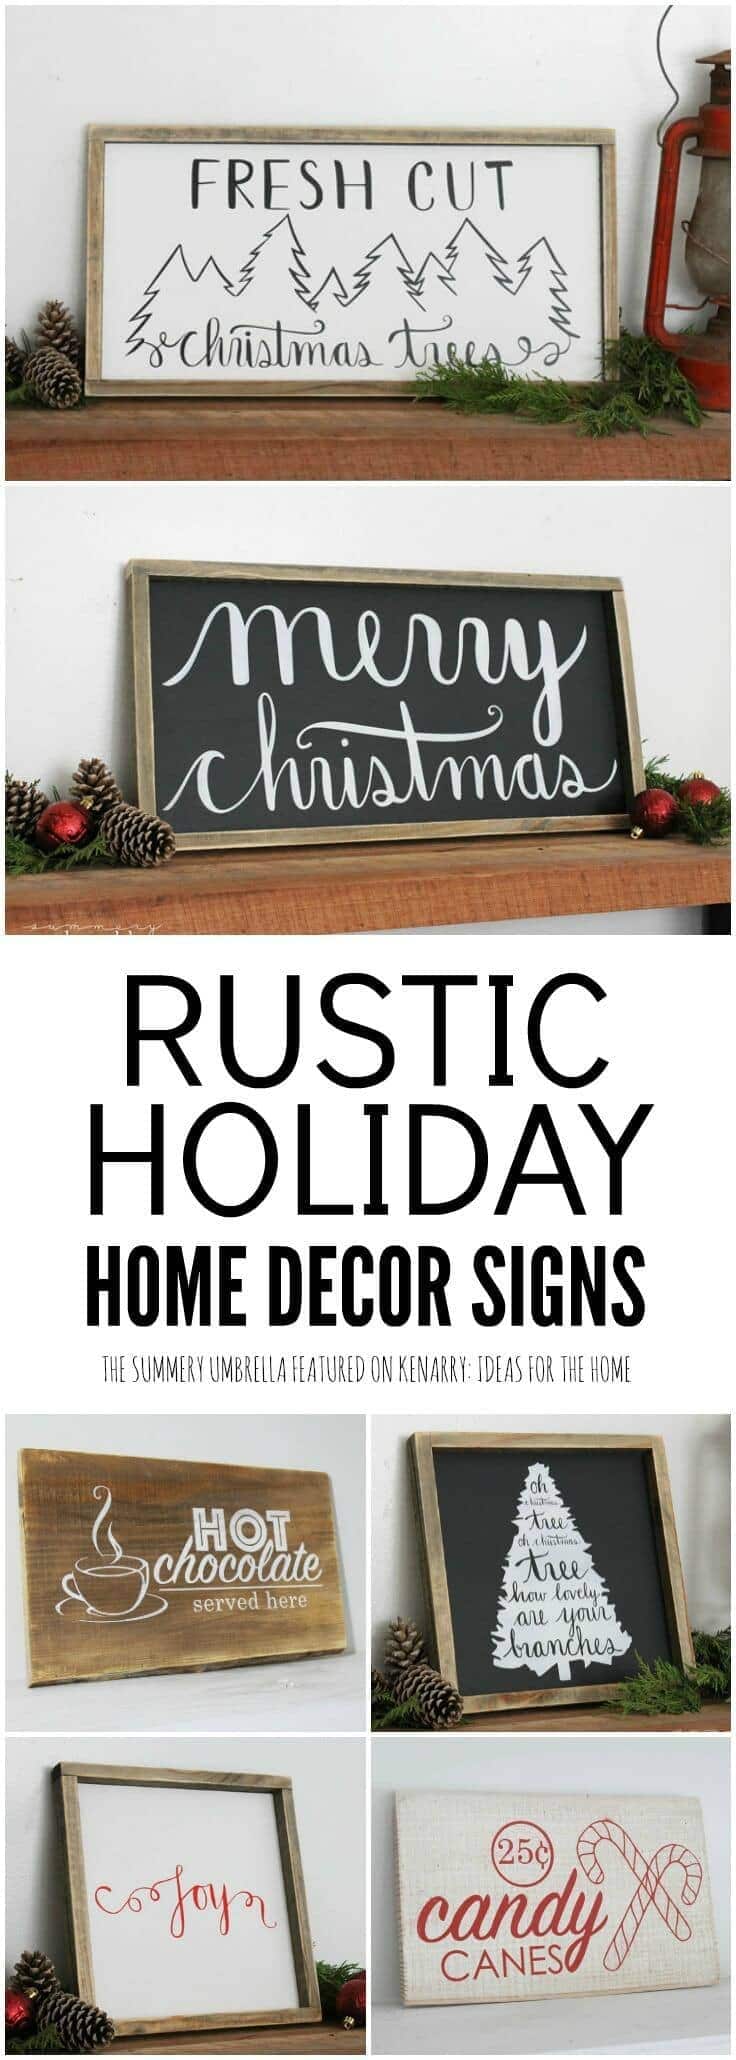 These holiday home decor signs would be perfect to hang on your walls to decorate your home for Christmas or winter.